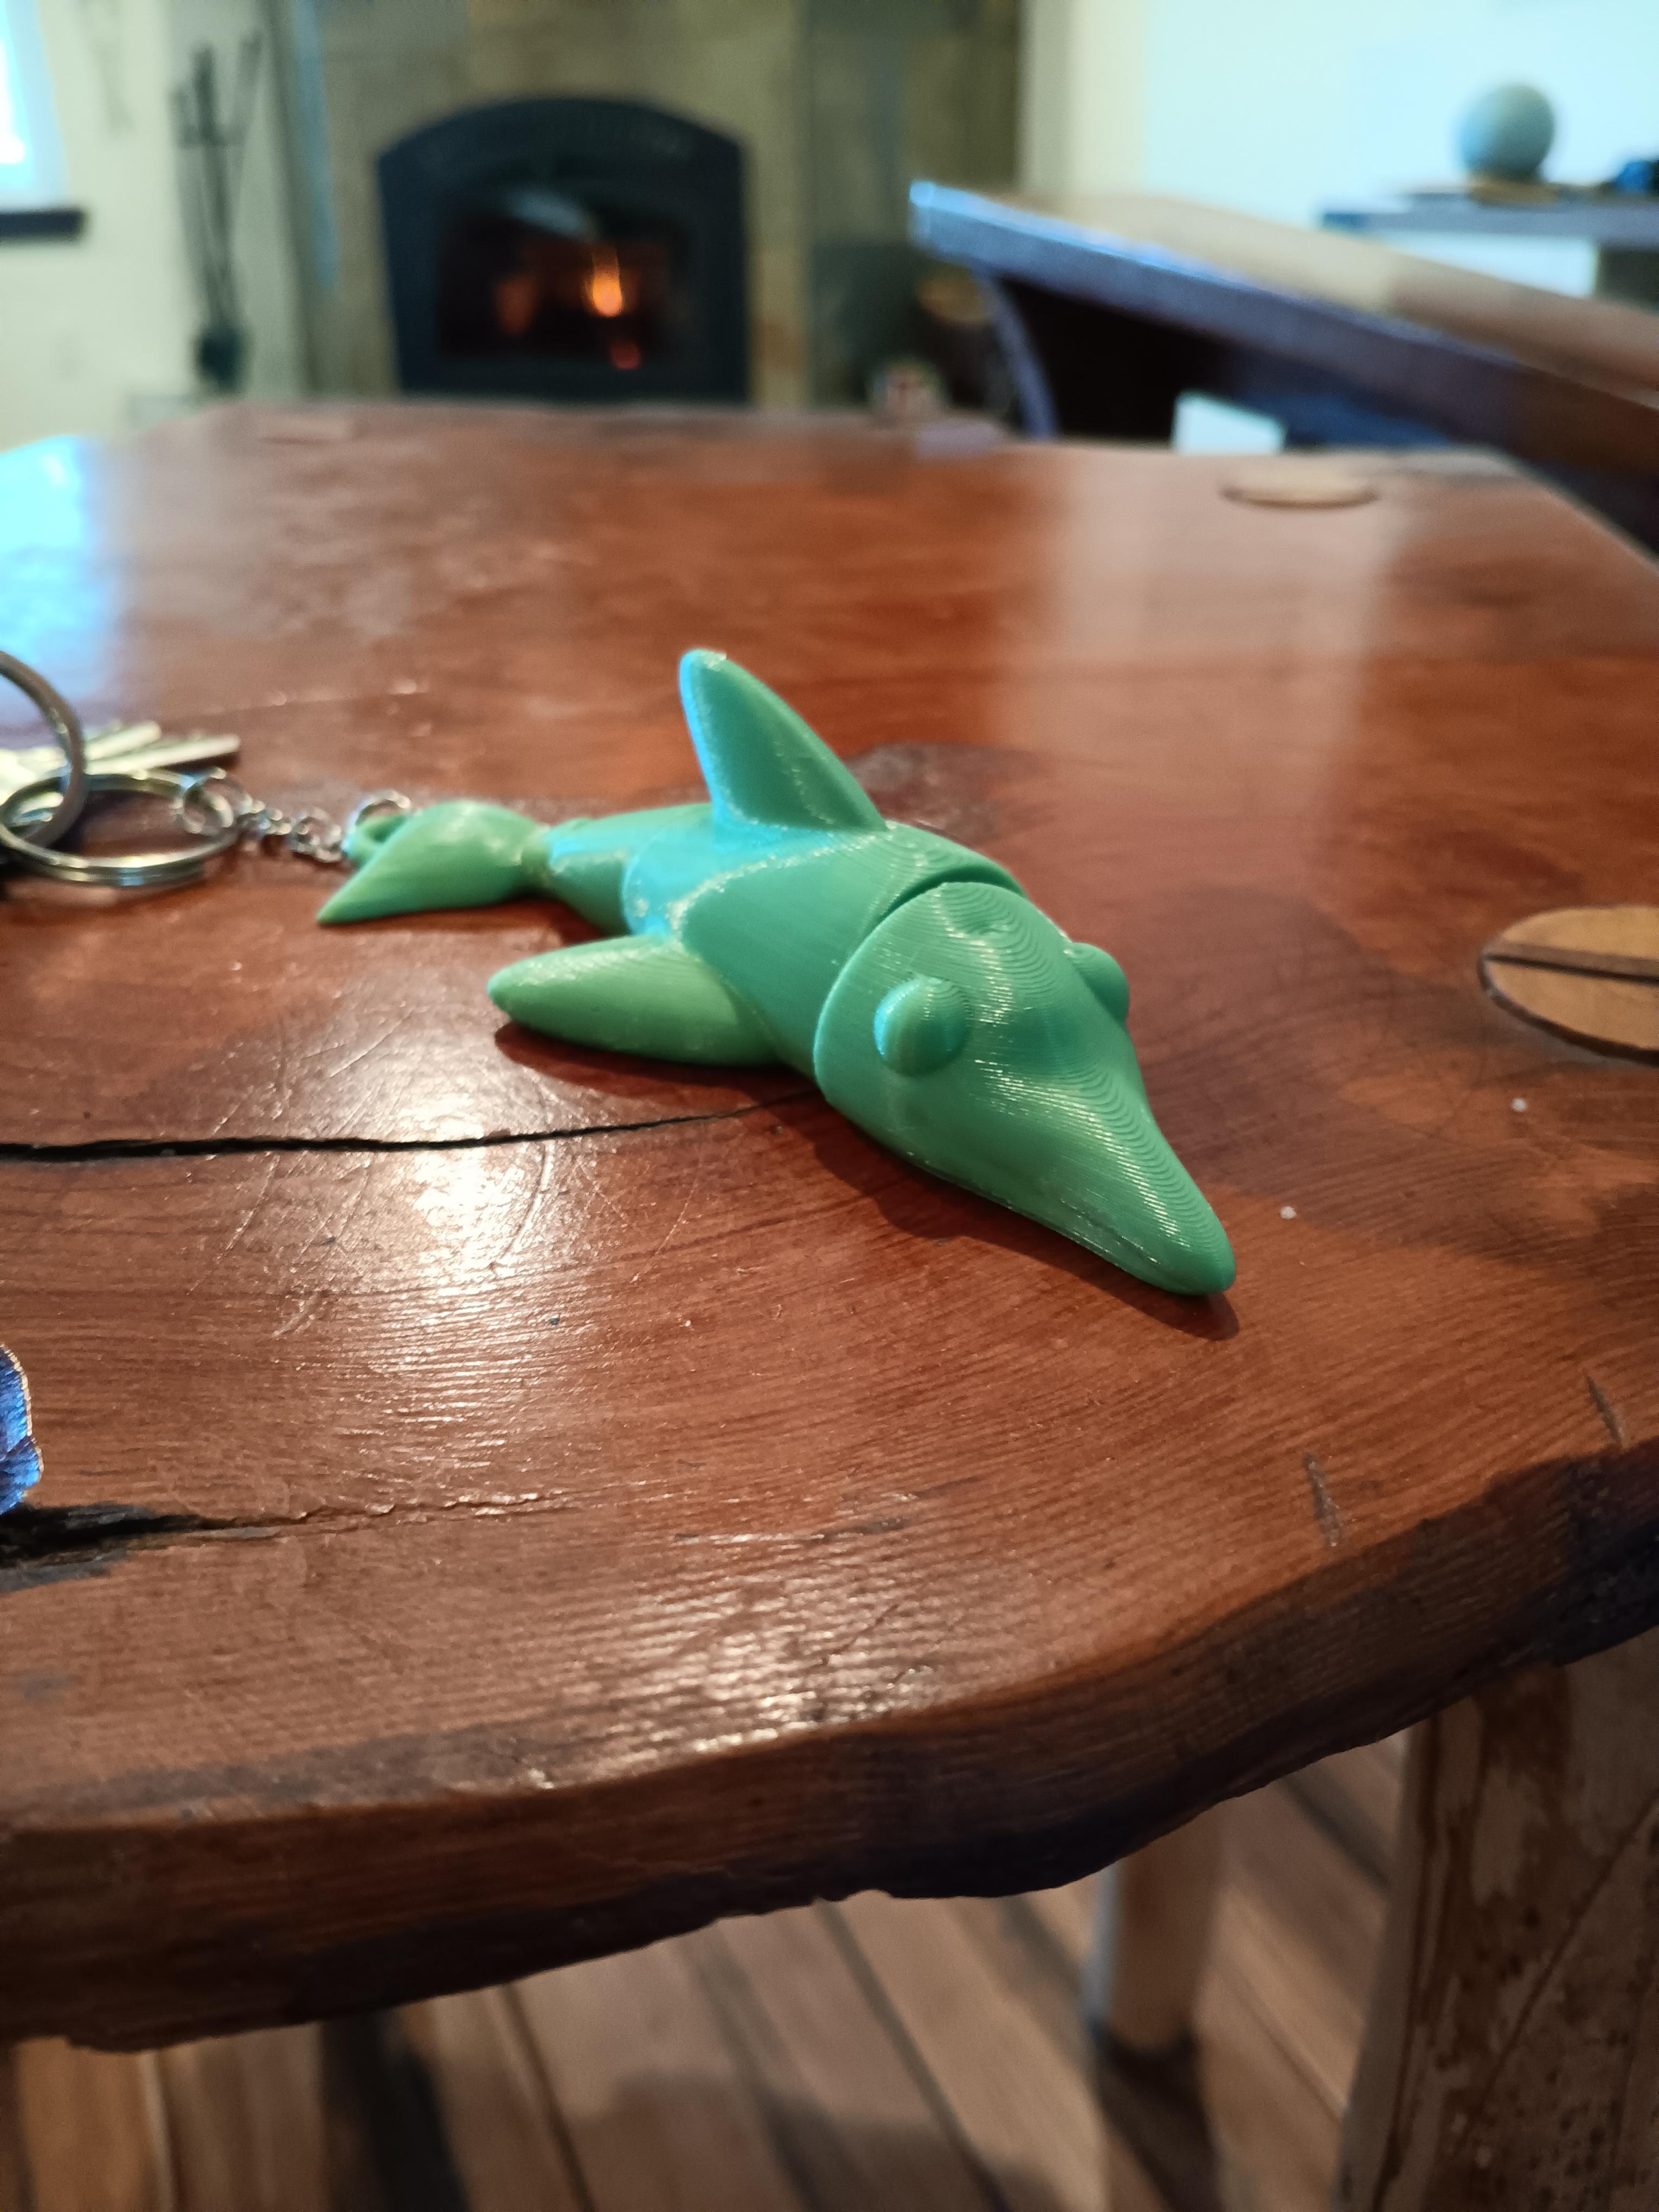 Flexi Dolphin Key chain - print in place - articulated - flexi fidget toy 3d model